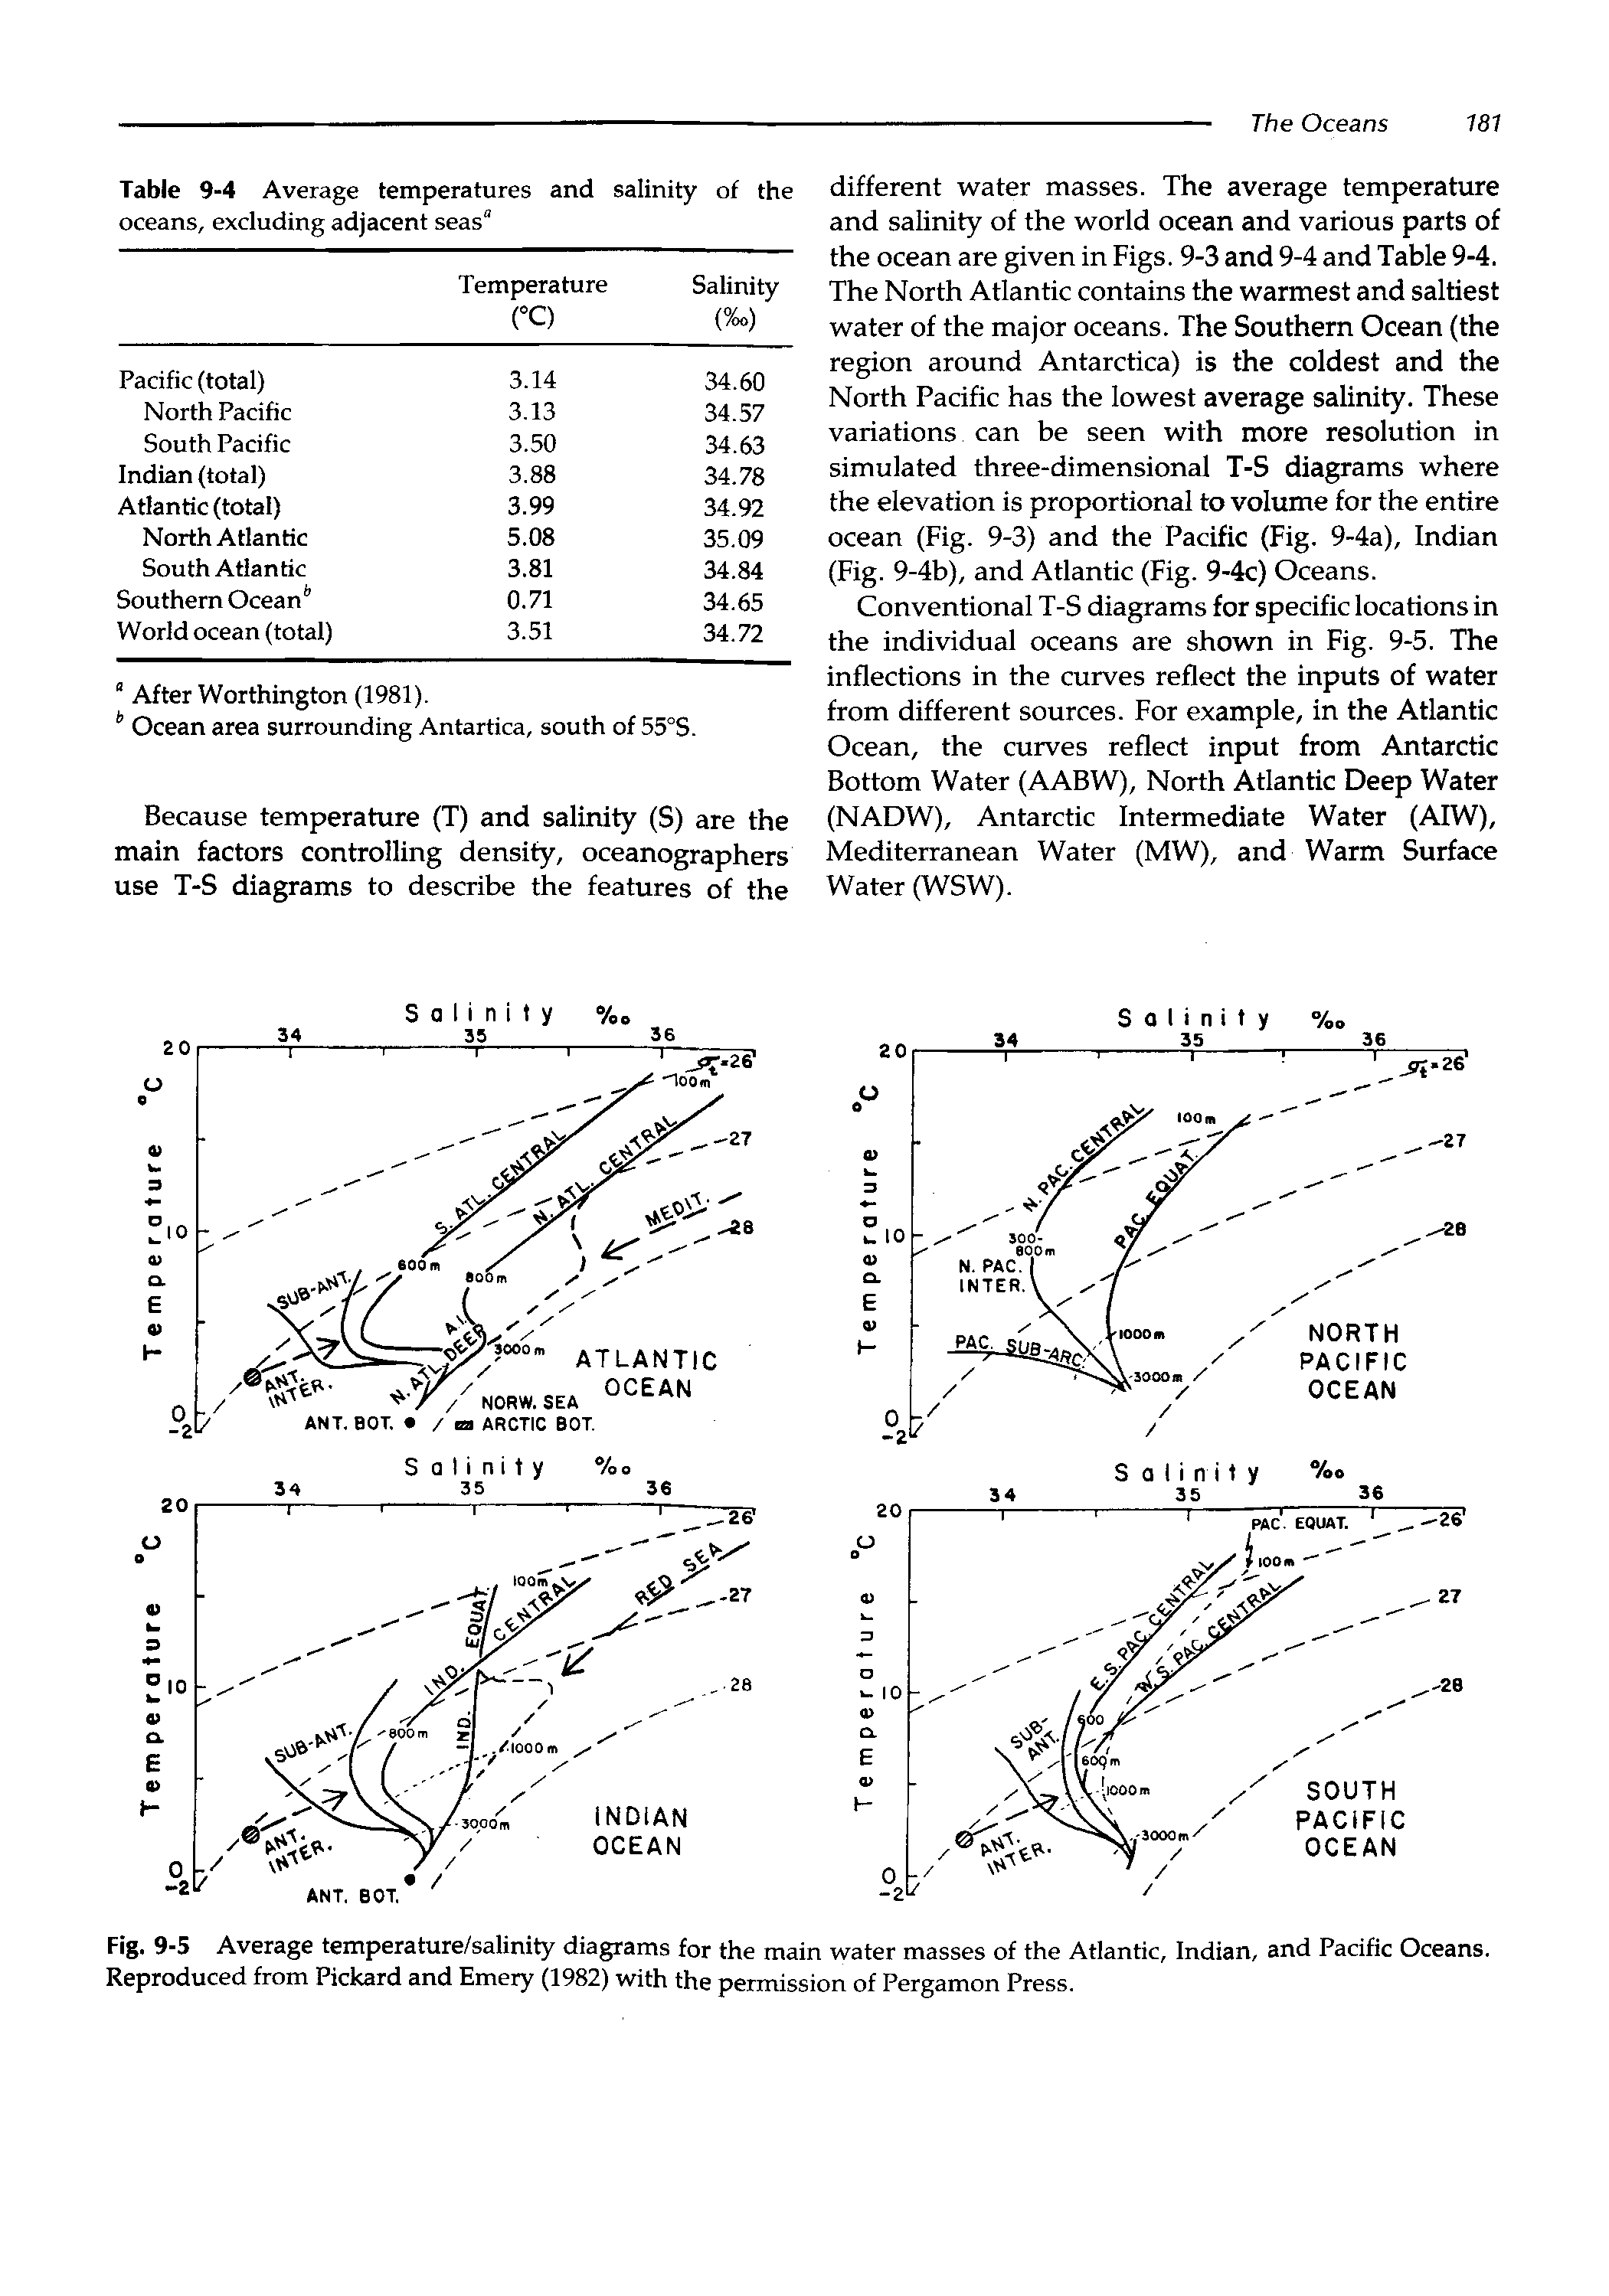 Fig. 9-5 Average temperature/salinity diagrams for the main water masses of the Atlantic, Indian, and Pacific Oceans. Reproduced from Pickard and Emery (1982) with the permission of Pergamon Press.